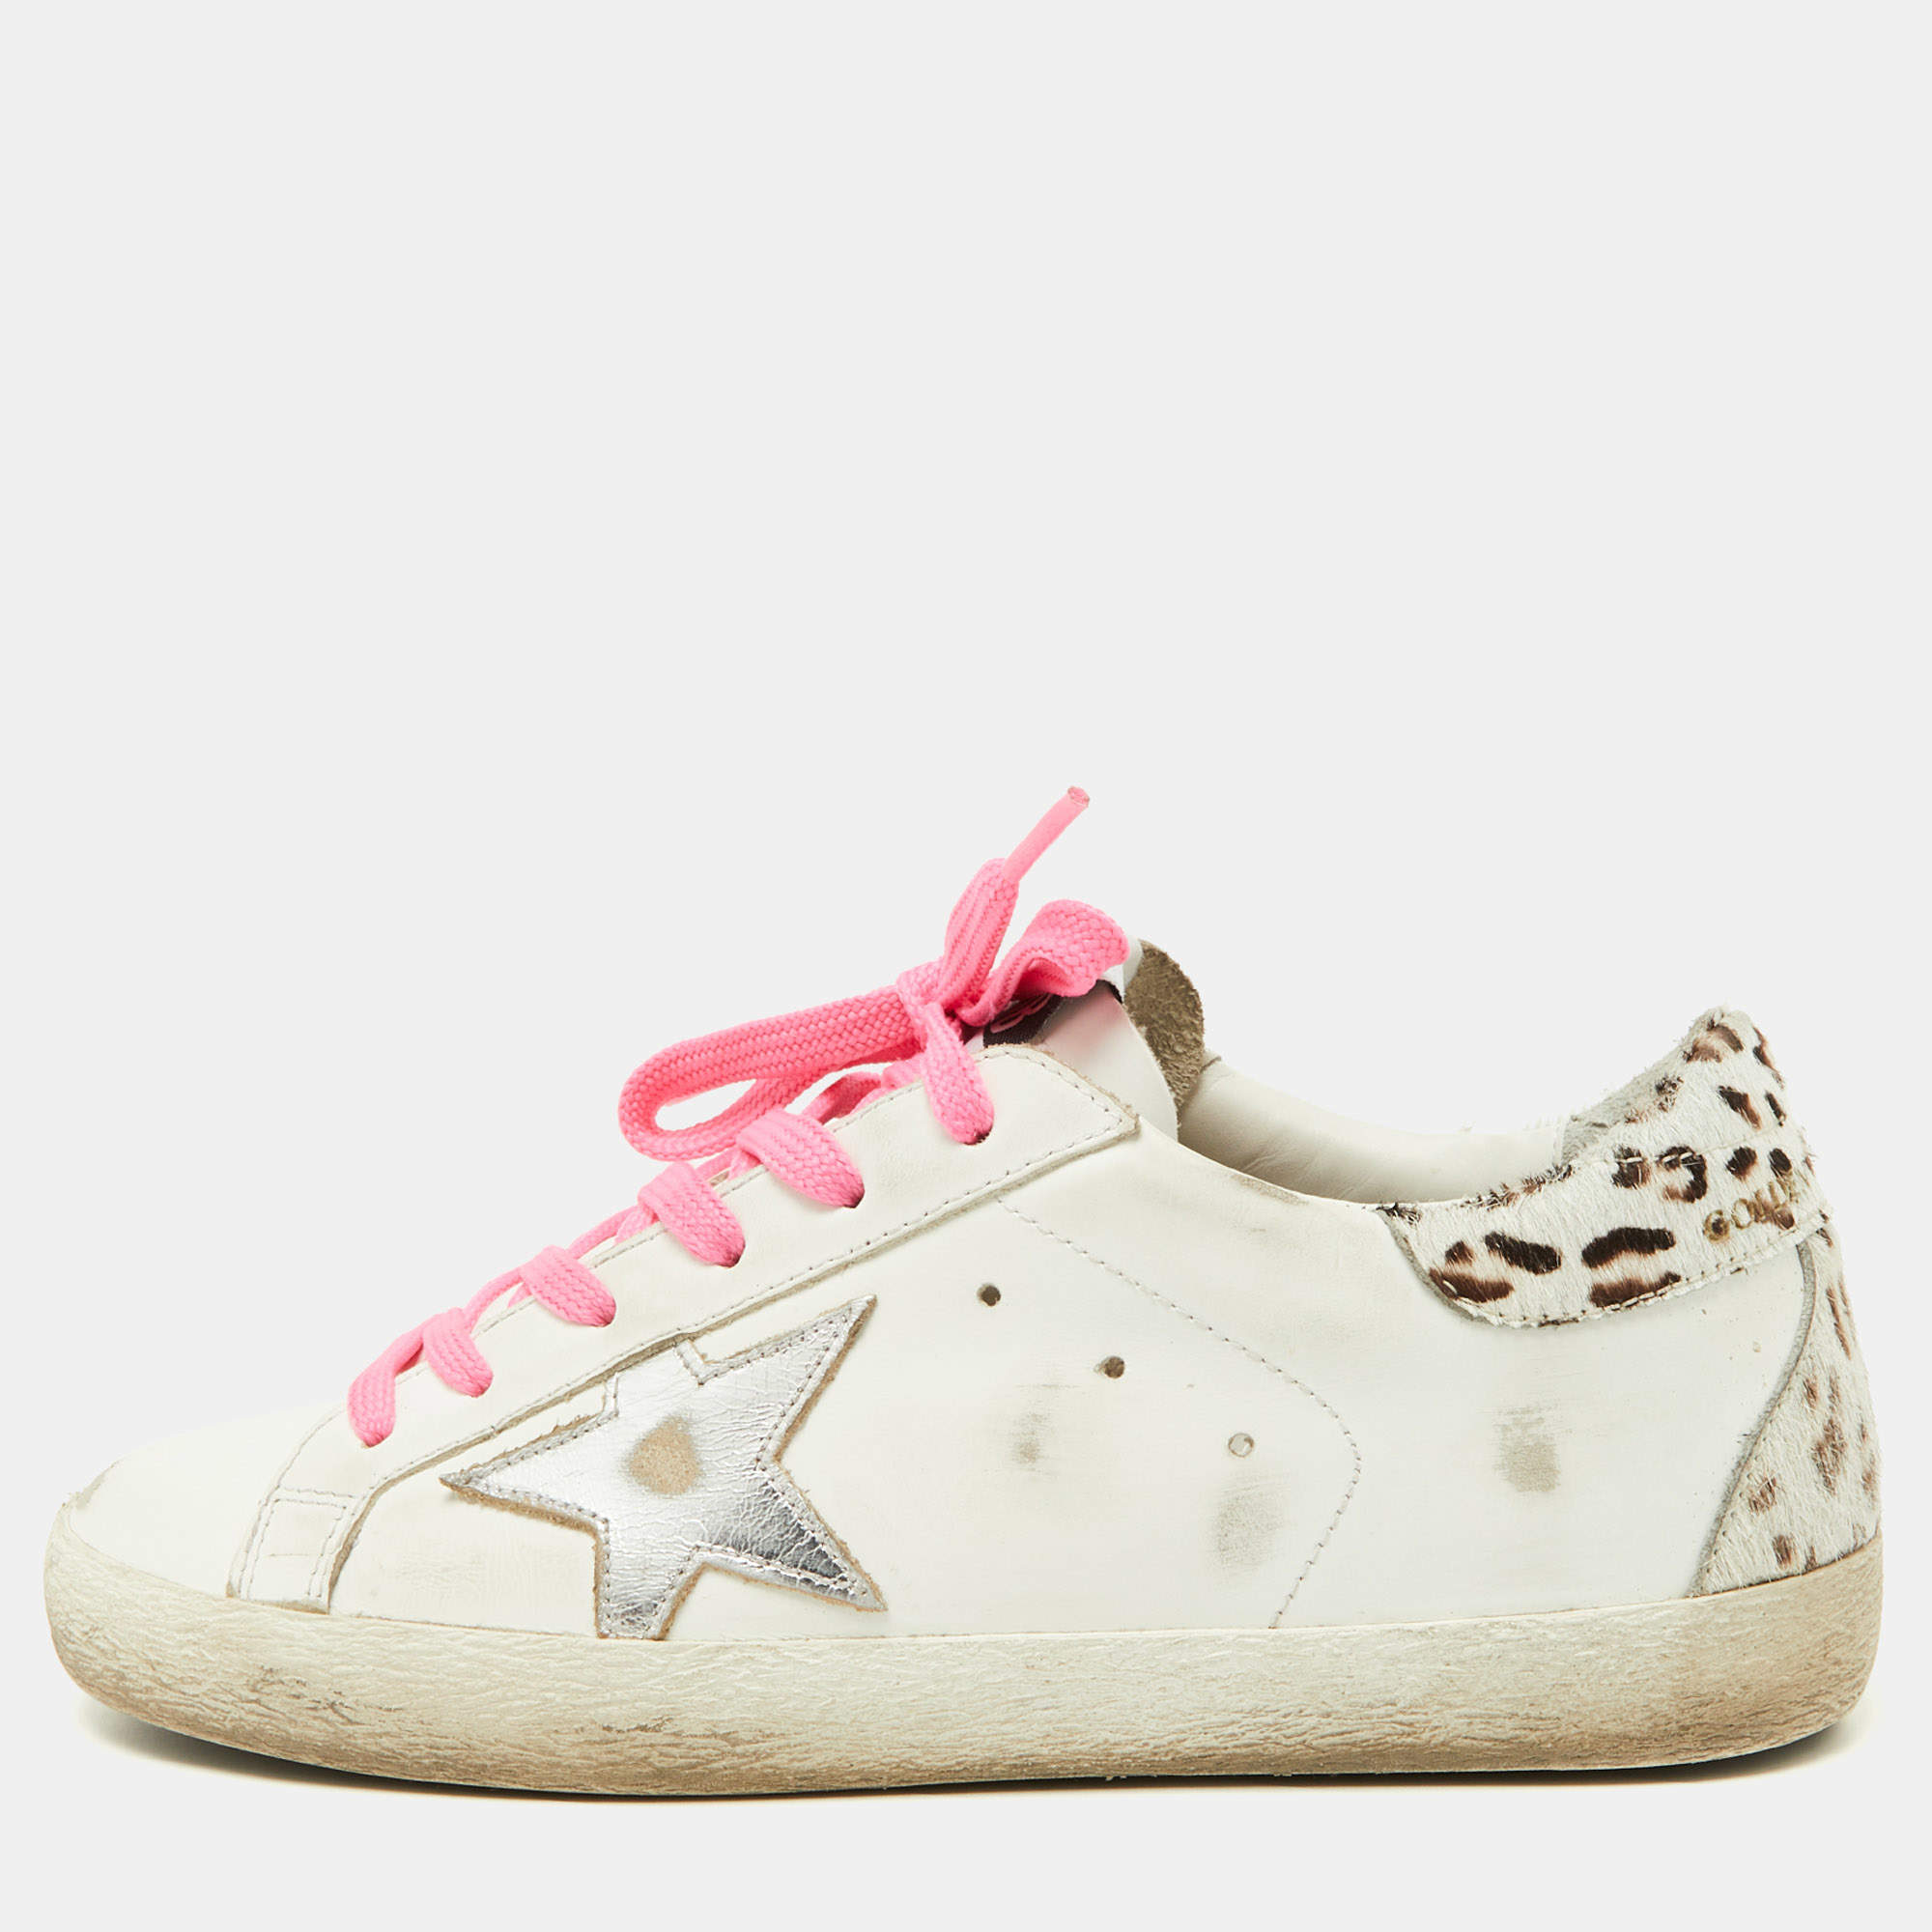 Golden Goose White/Brown Leather and Calf Hair Superstar Sneakers Size 37